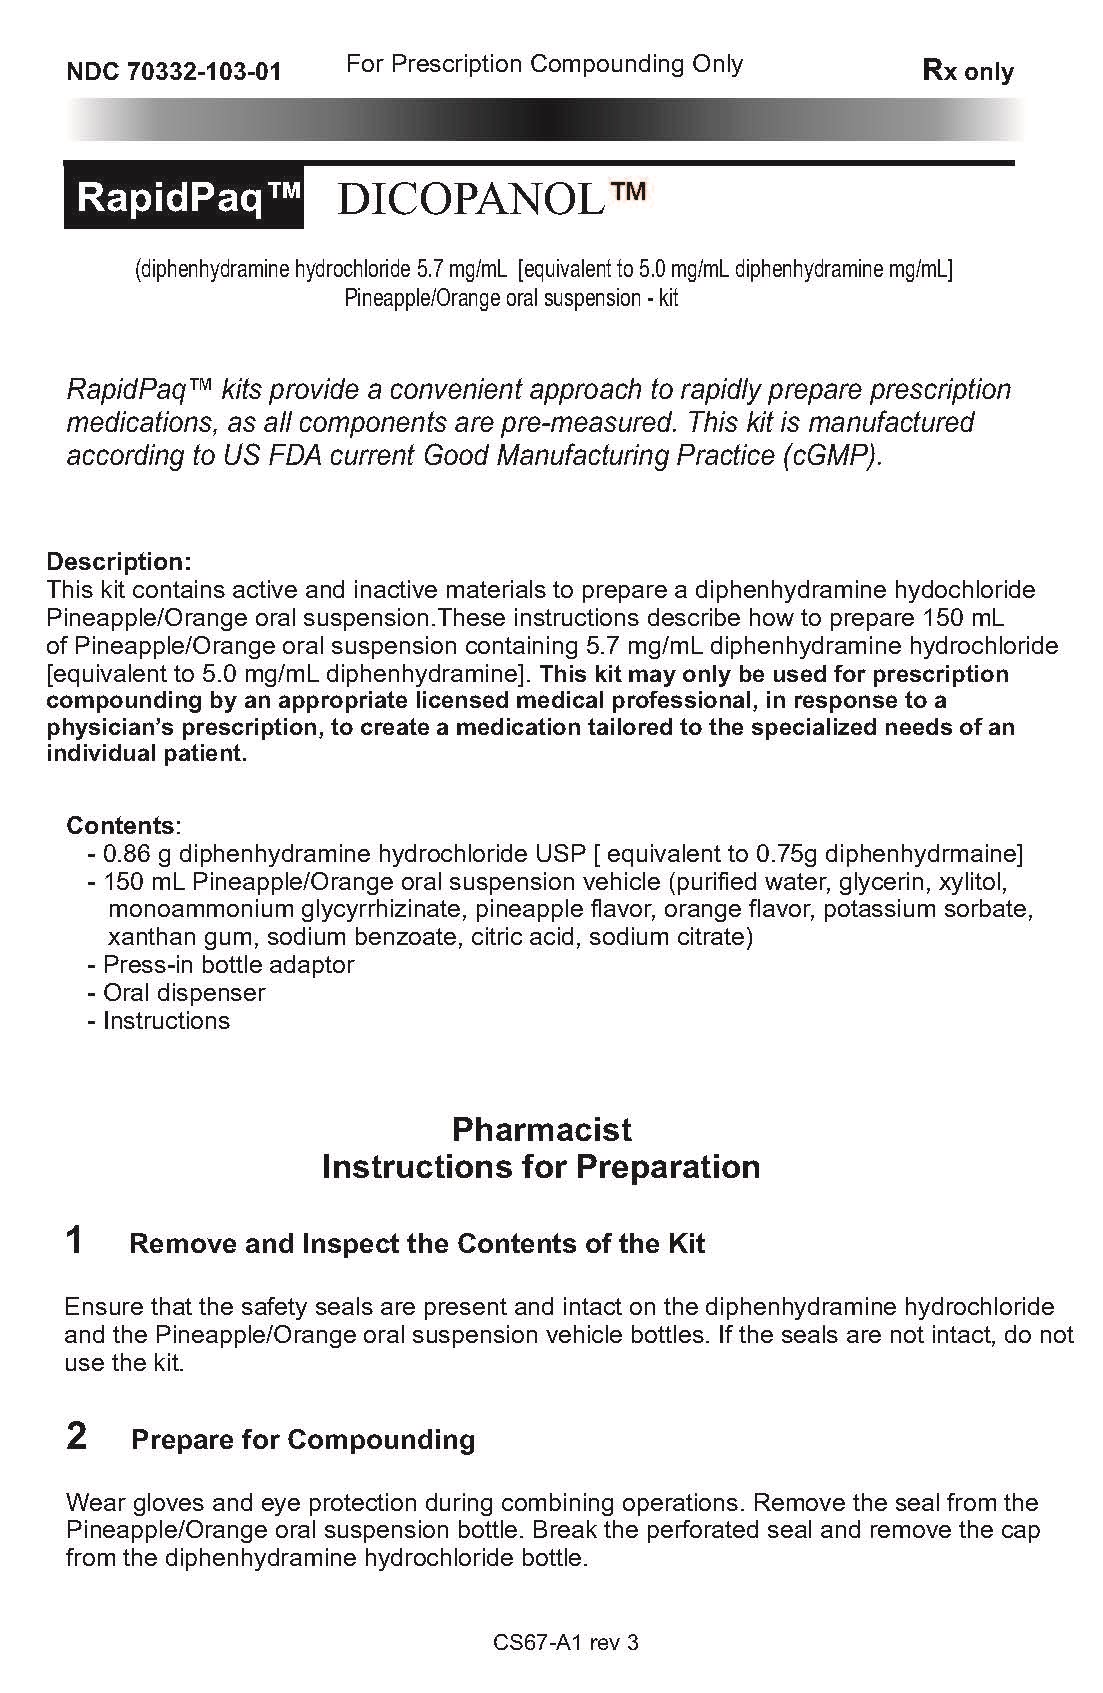 Dicopanol - Instructions Page 1